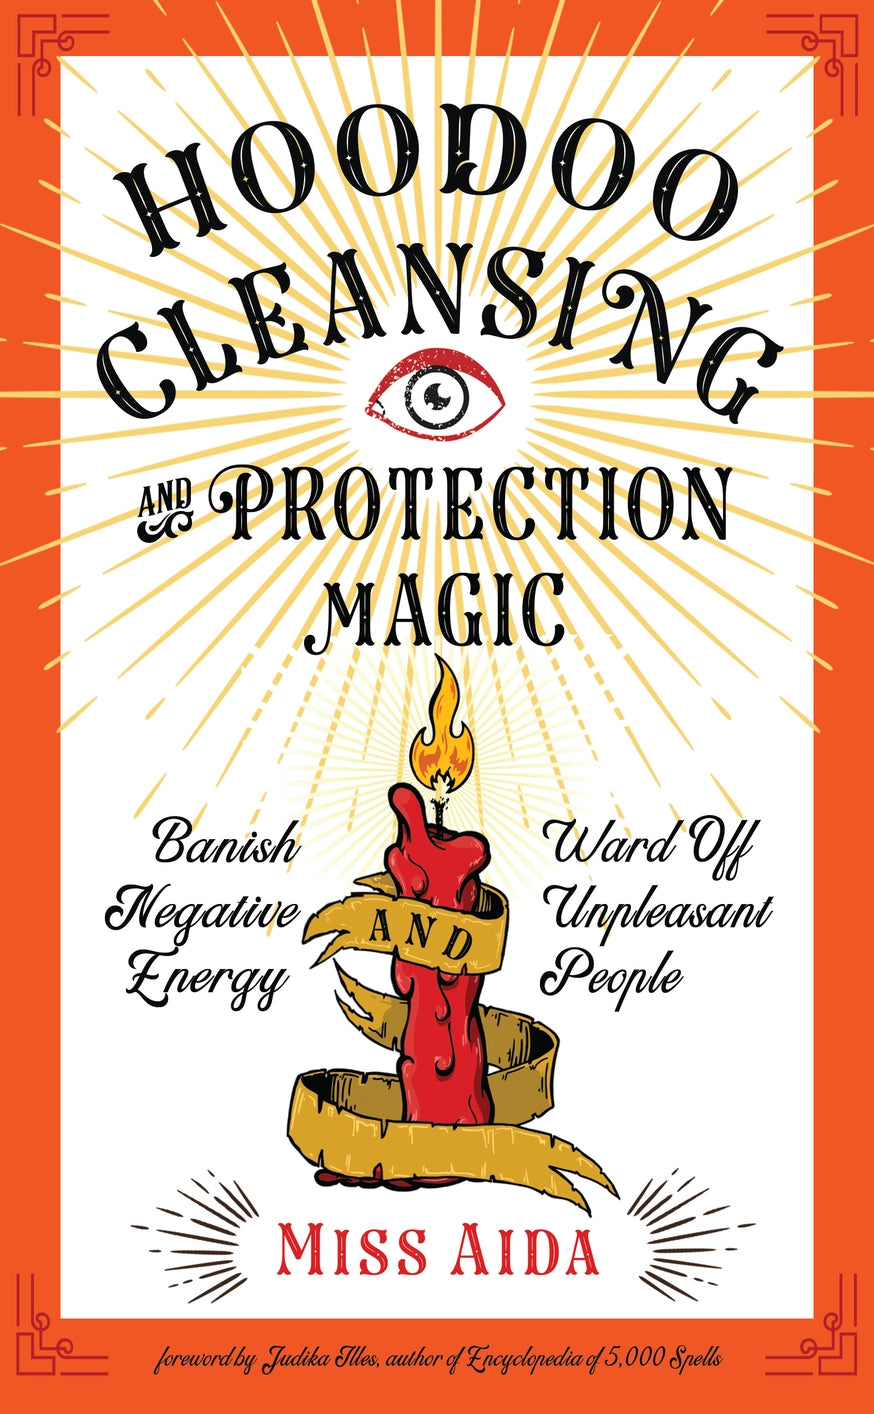 hoodoo cleansing and protection magic